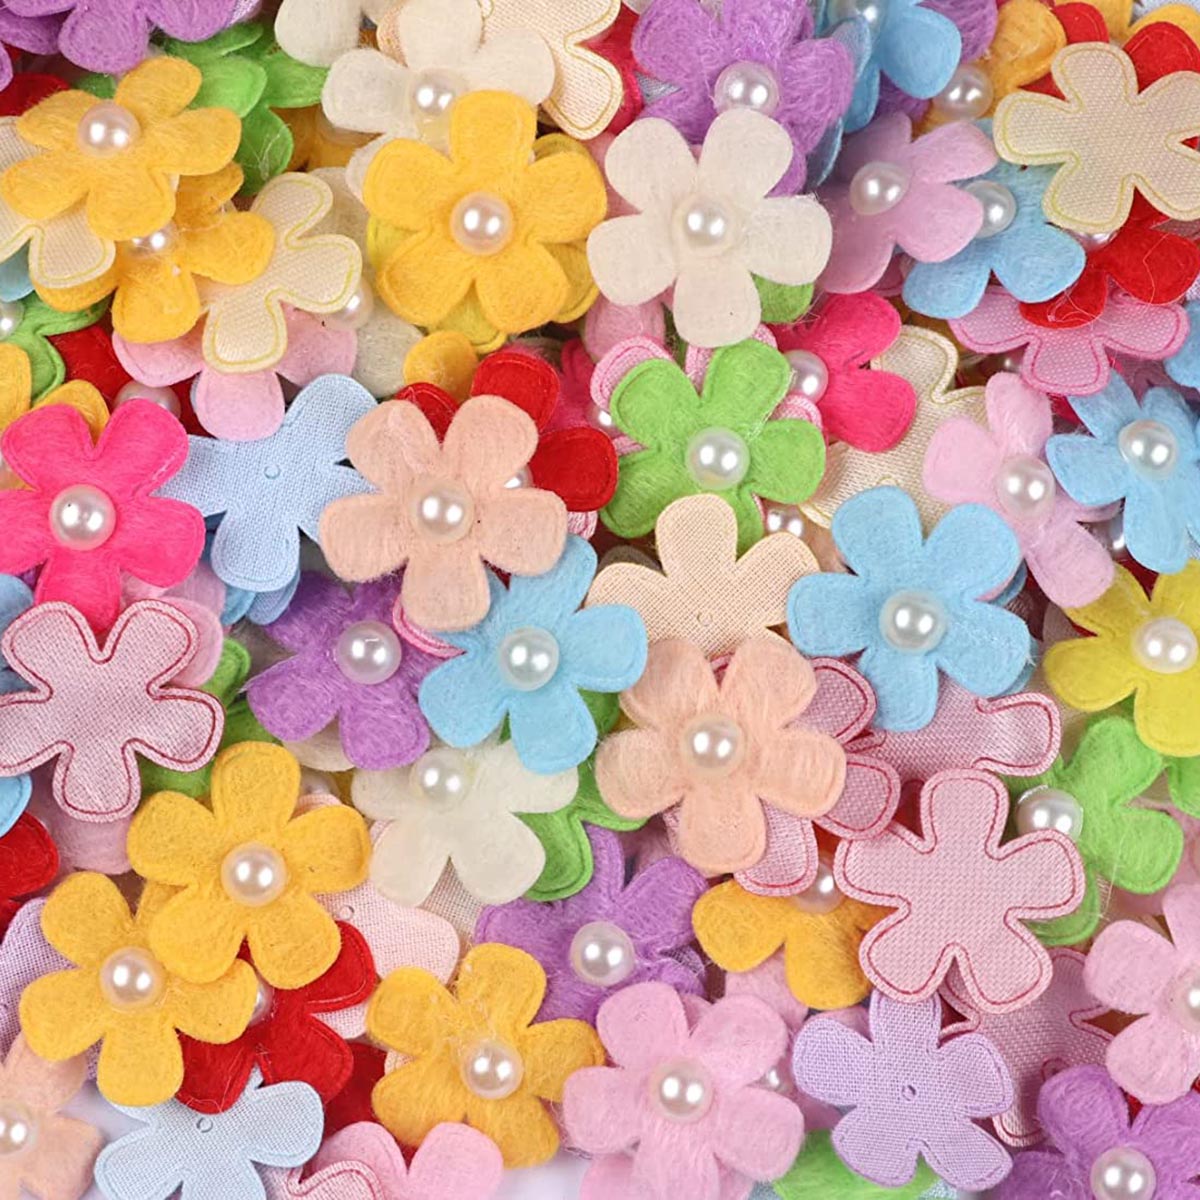 200pcs Furry Flower Fabric Flower W/Bead,1 Inch Mix Color